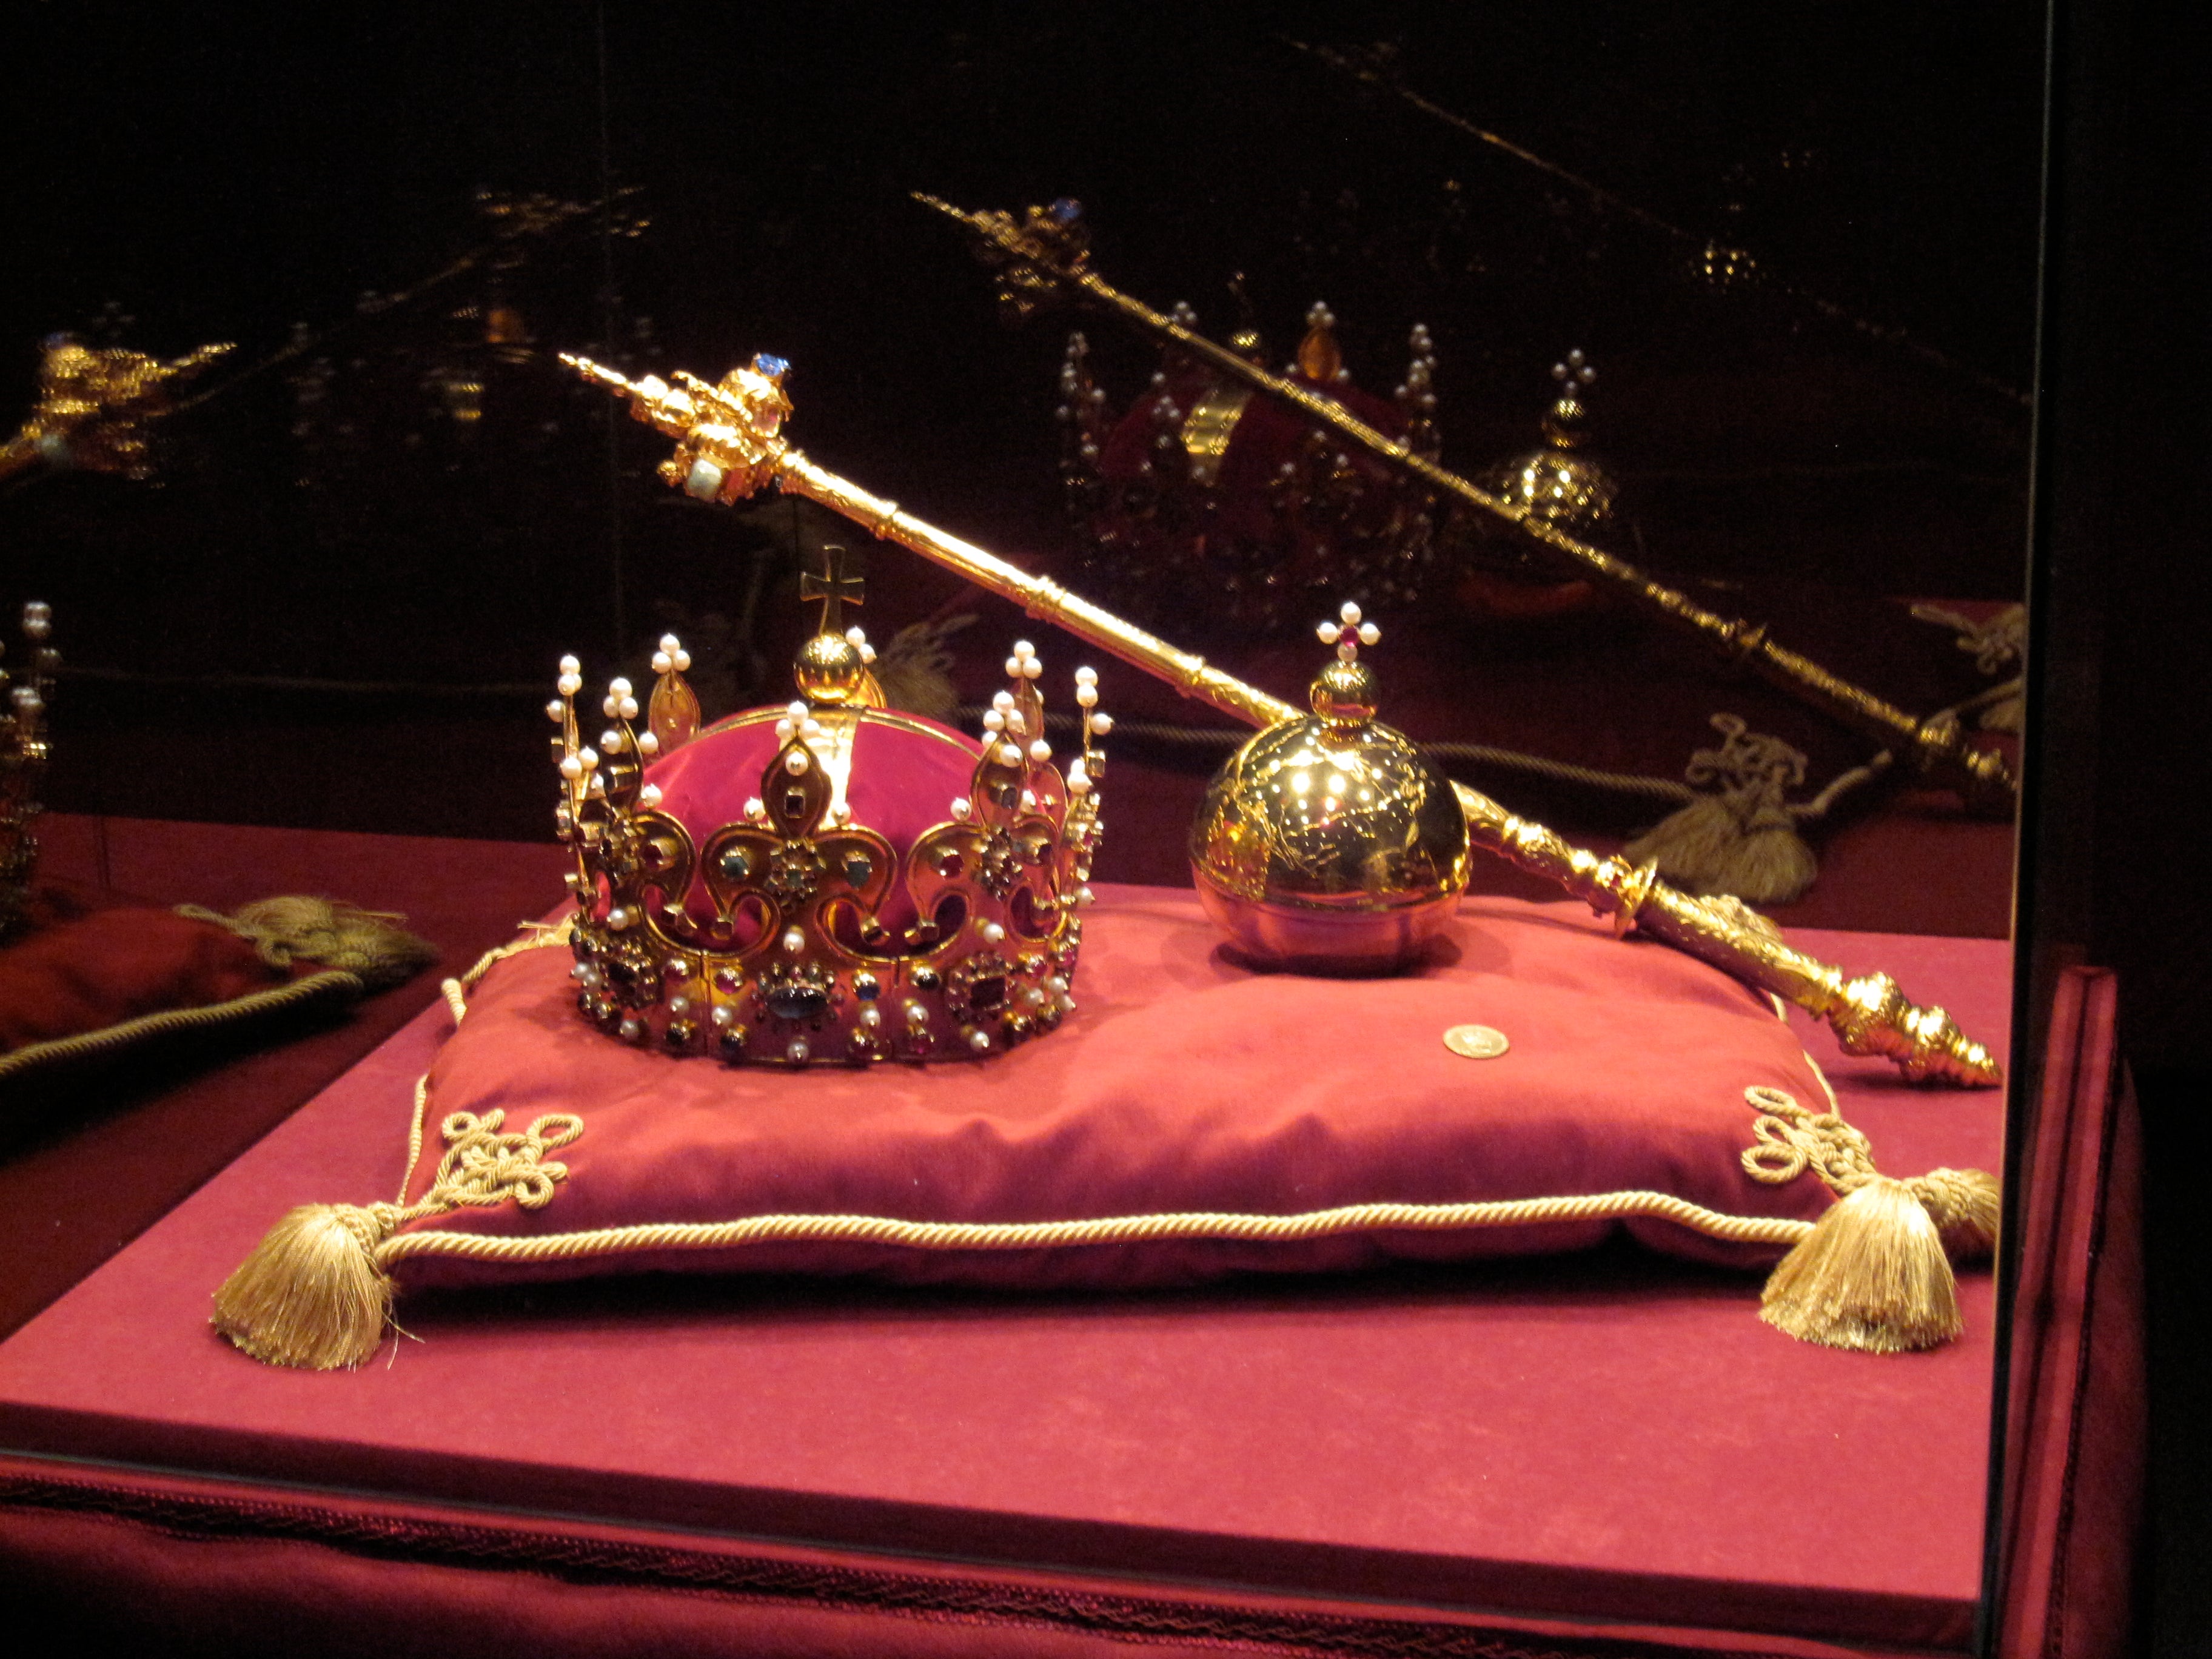 Crown and sceptre